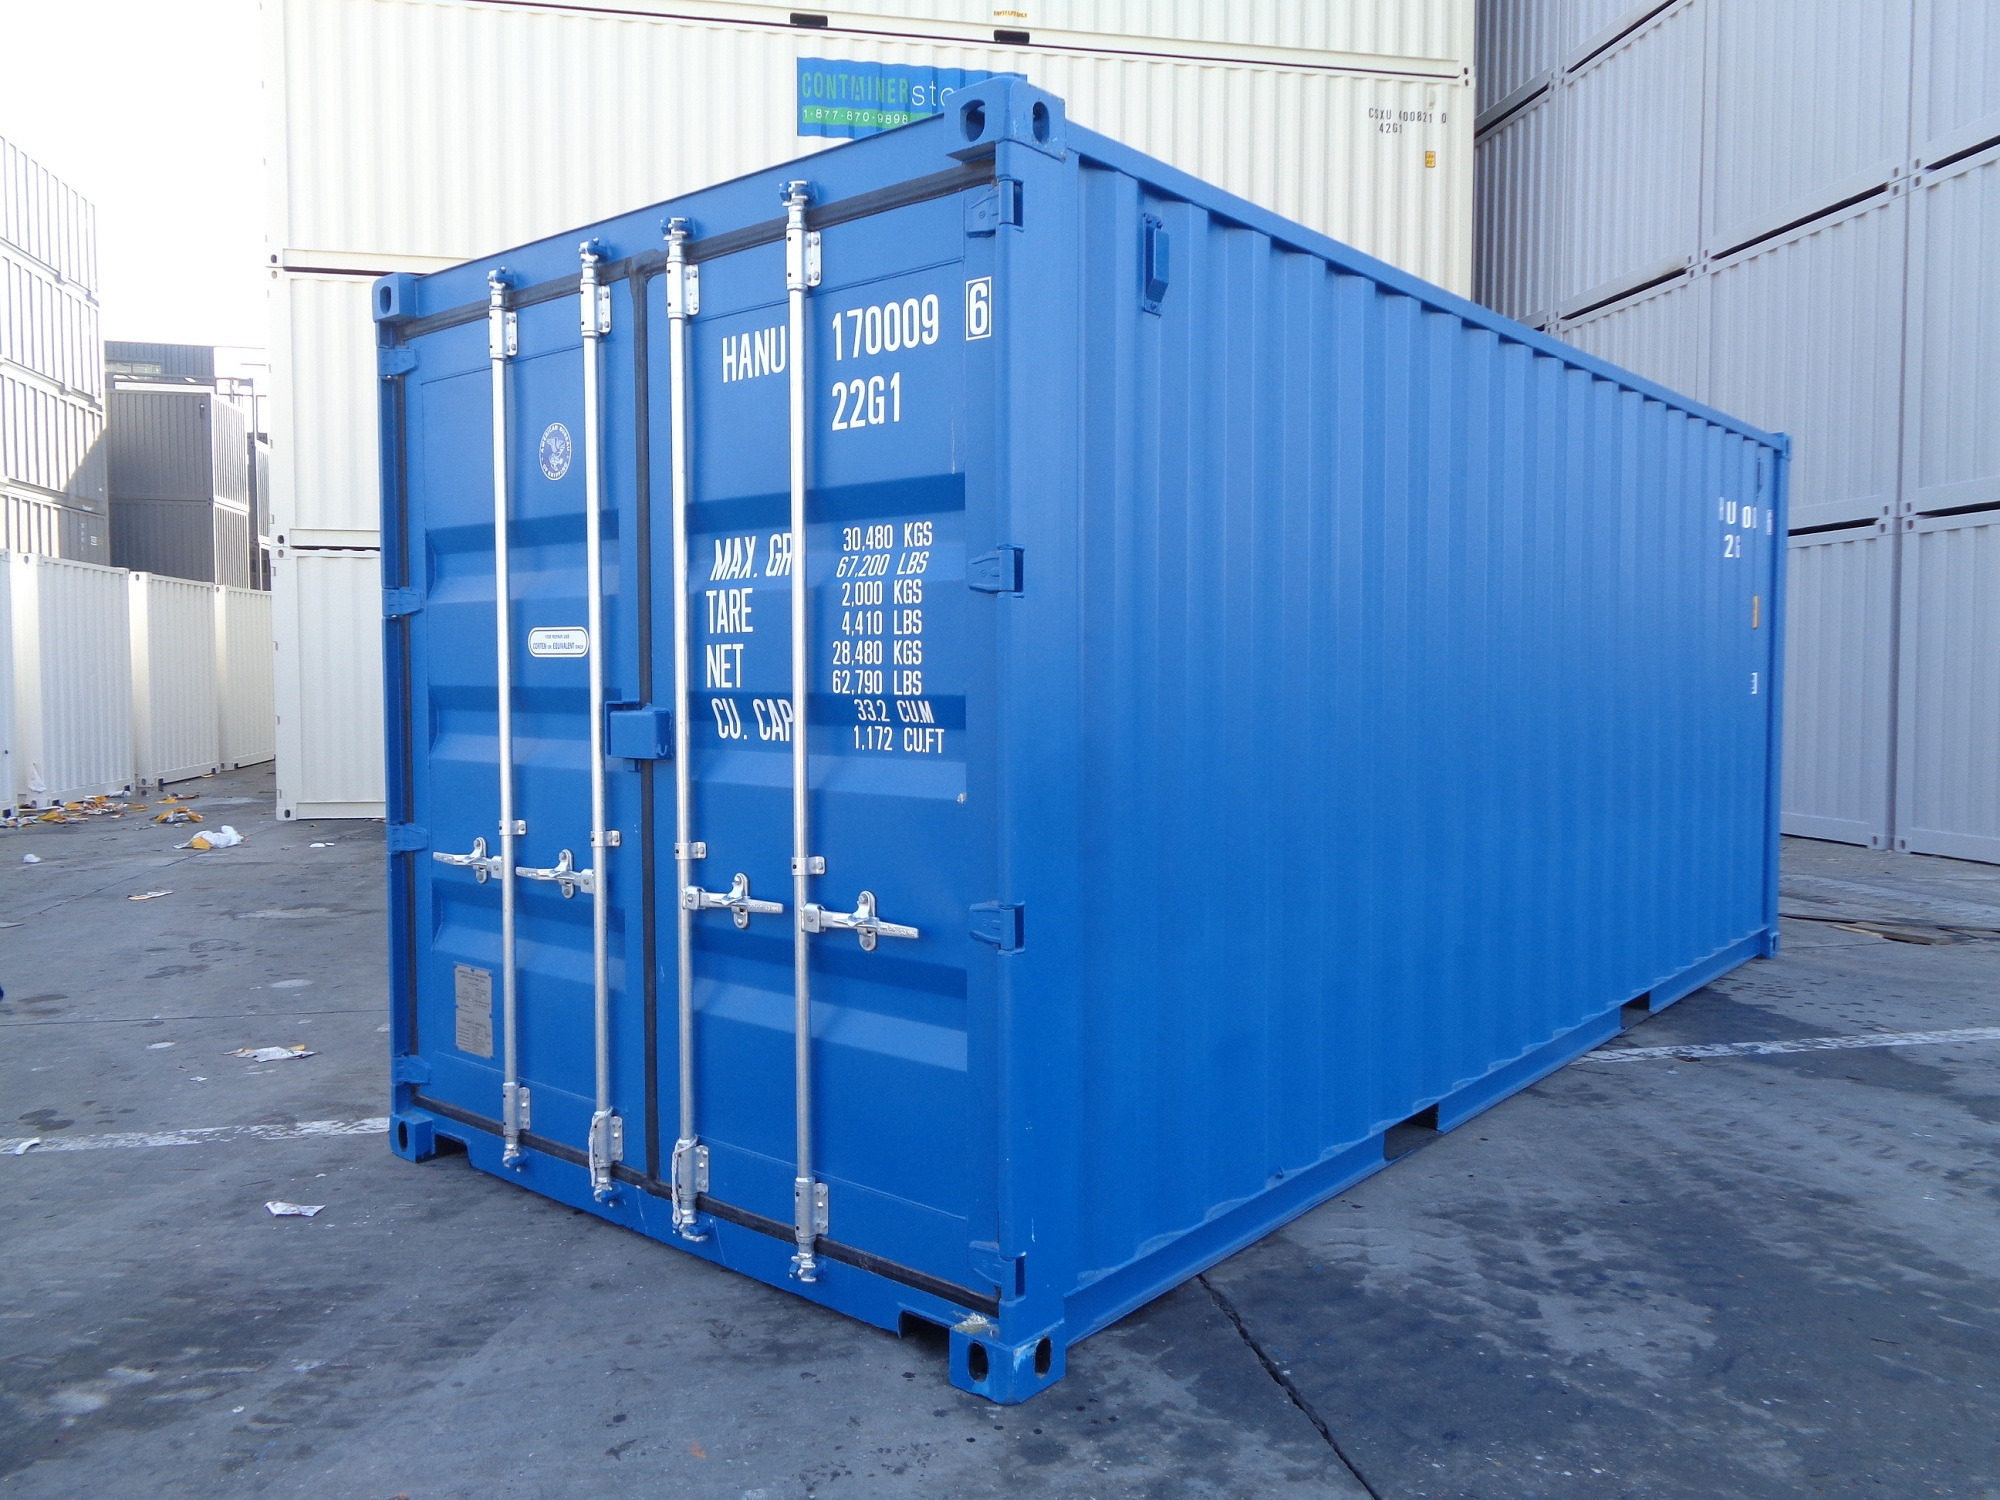 HCT Hansa Container Trading GmbH undefined: pilt 4